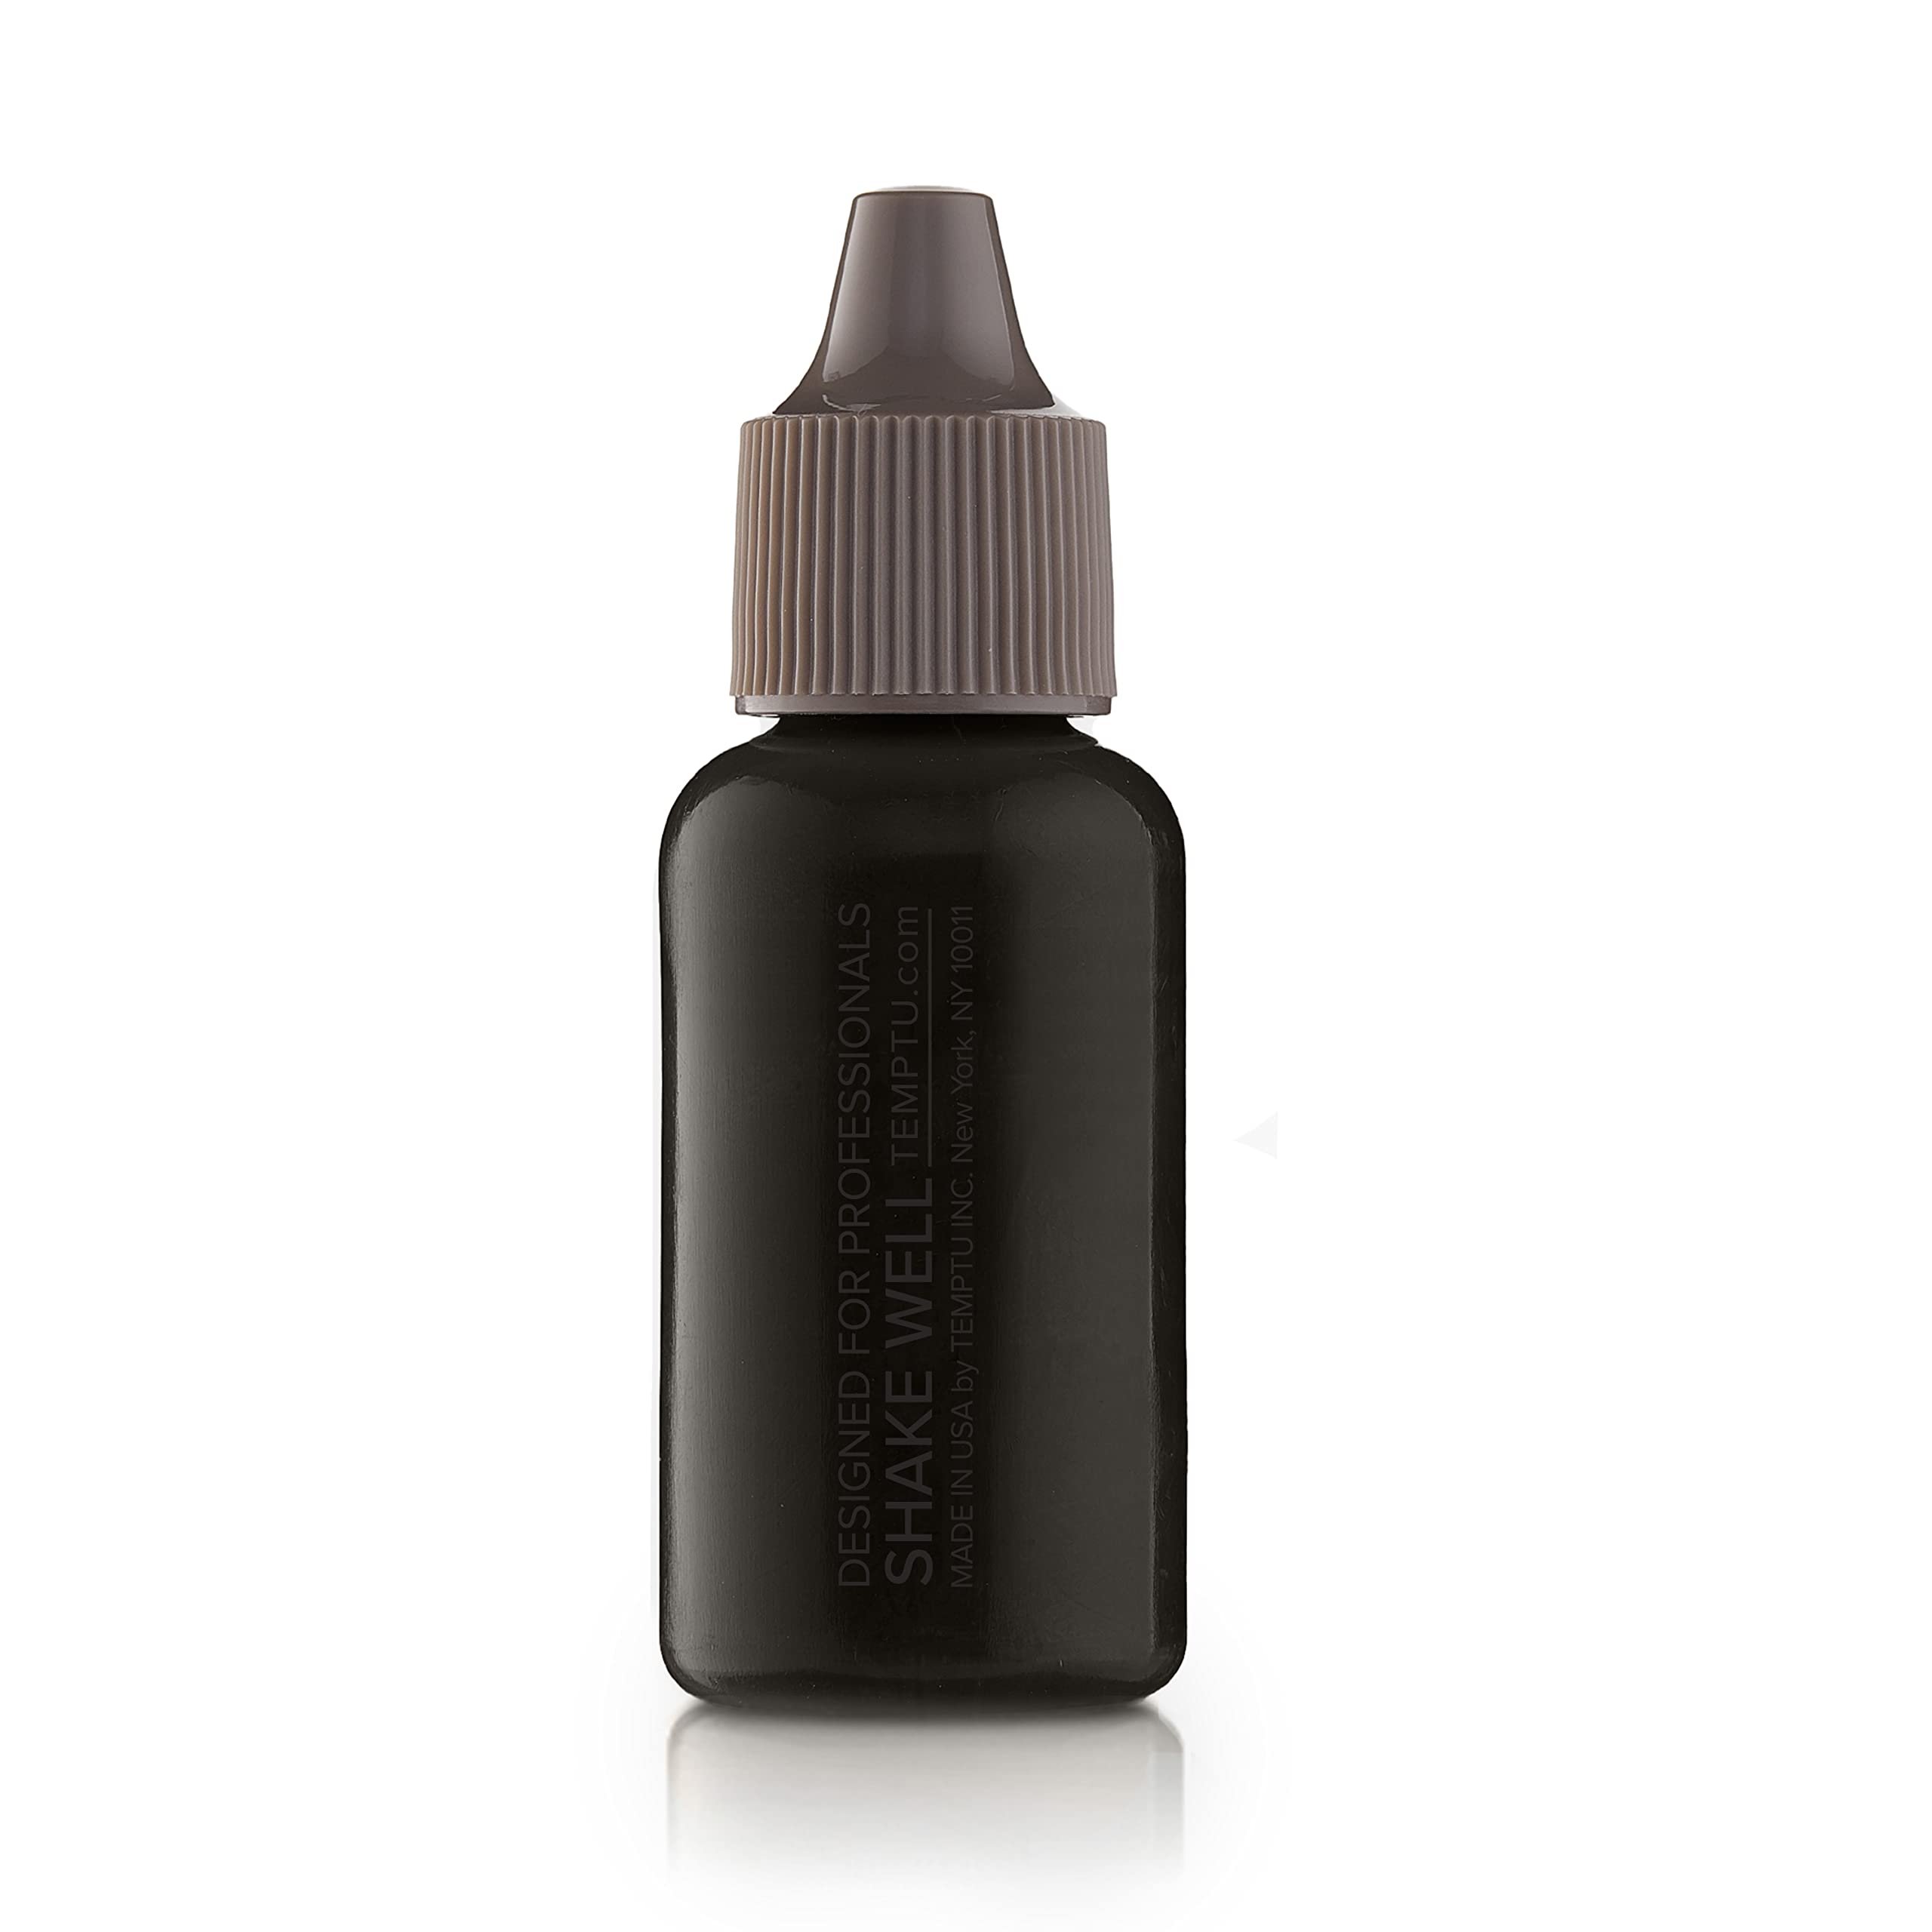 TEMPTU Airbrush Root Touch-Up & Temporary Hair Color: At-Home Spray Root Concealer For TEMPTU Air, Cover Grays, Fill In Edges, Beards & Brows Quickly & Easily, Ammonia & Peroxide-Free, 6 Shades